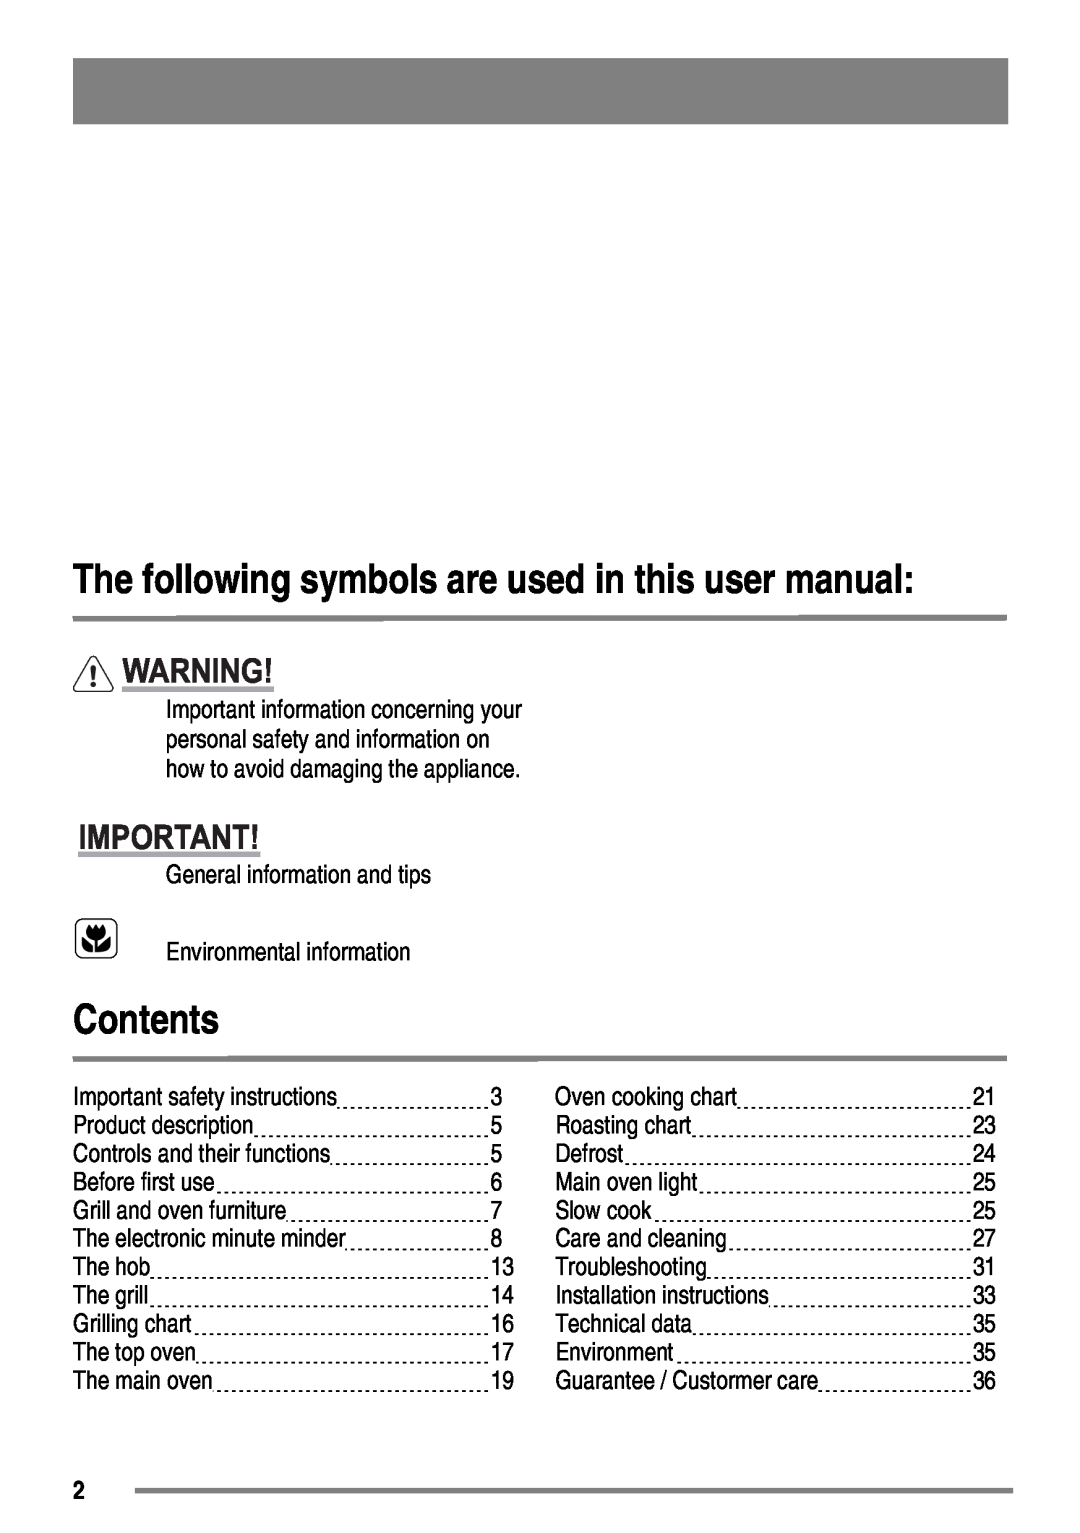 Zanussi ZKC6020 Contents, The following symbols are used in this user manual 